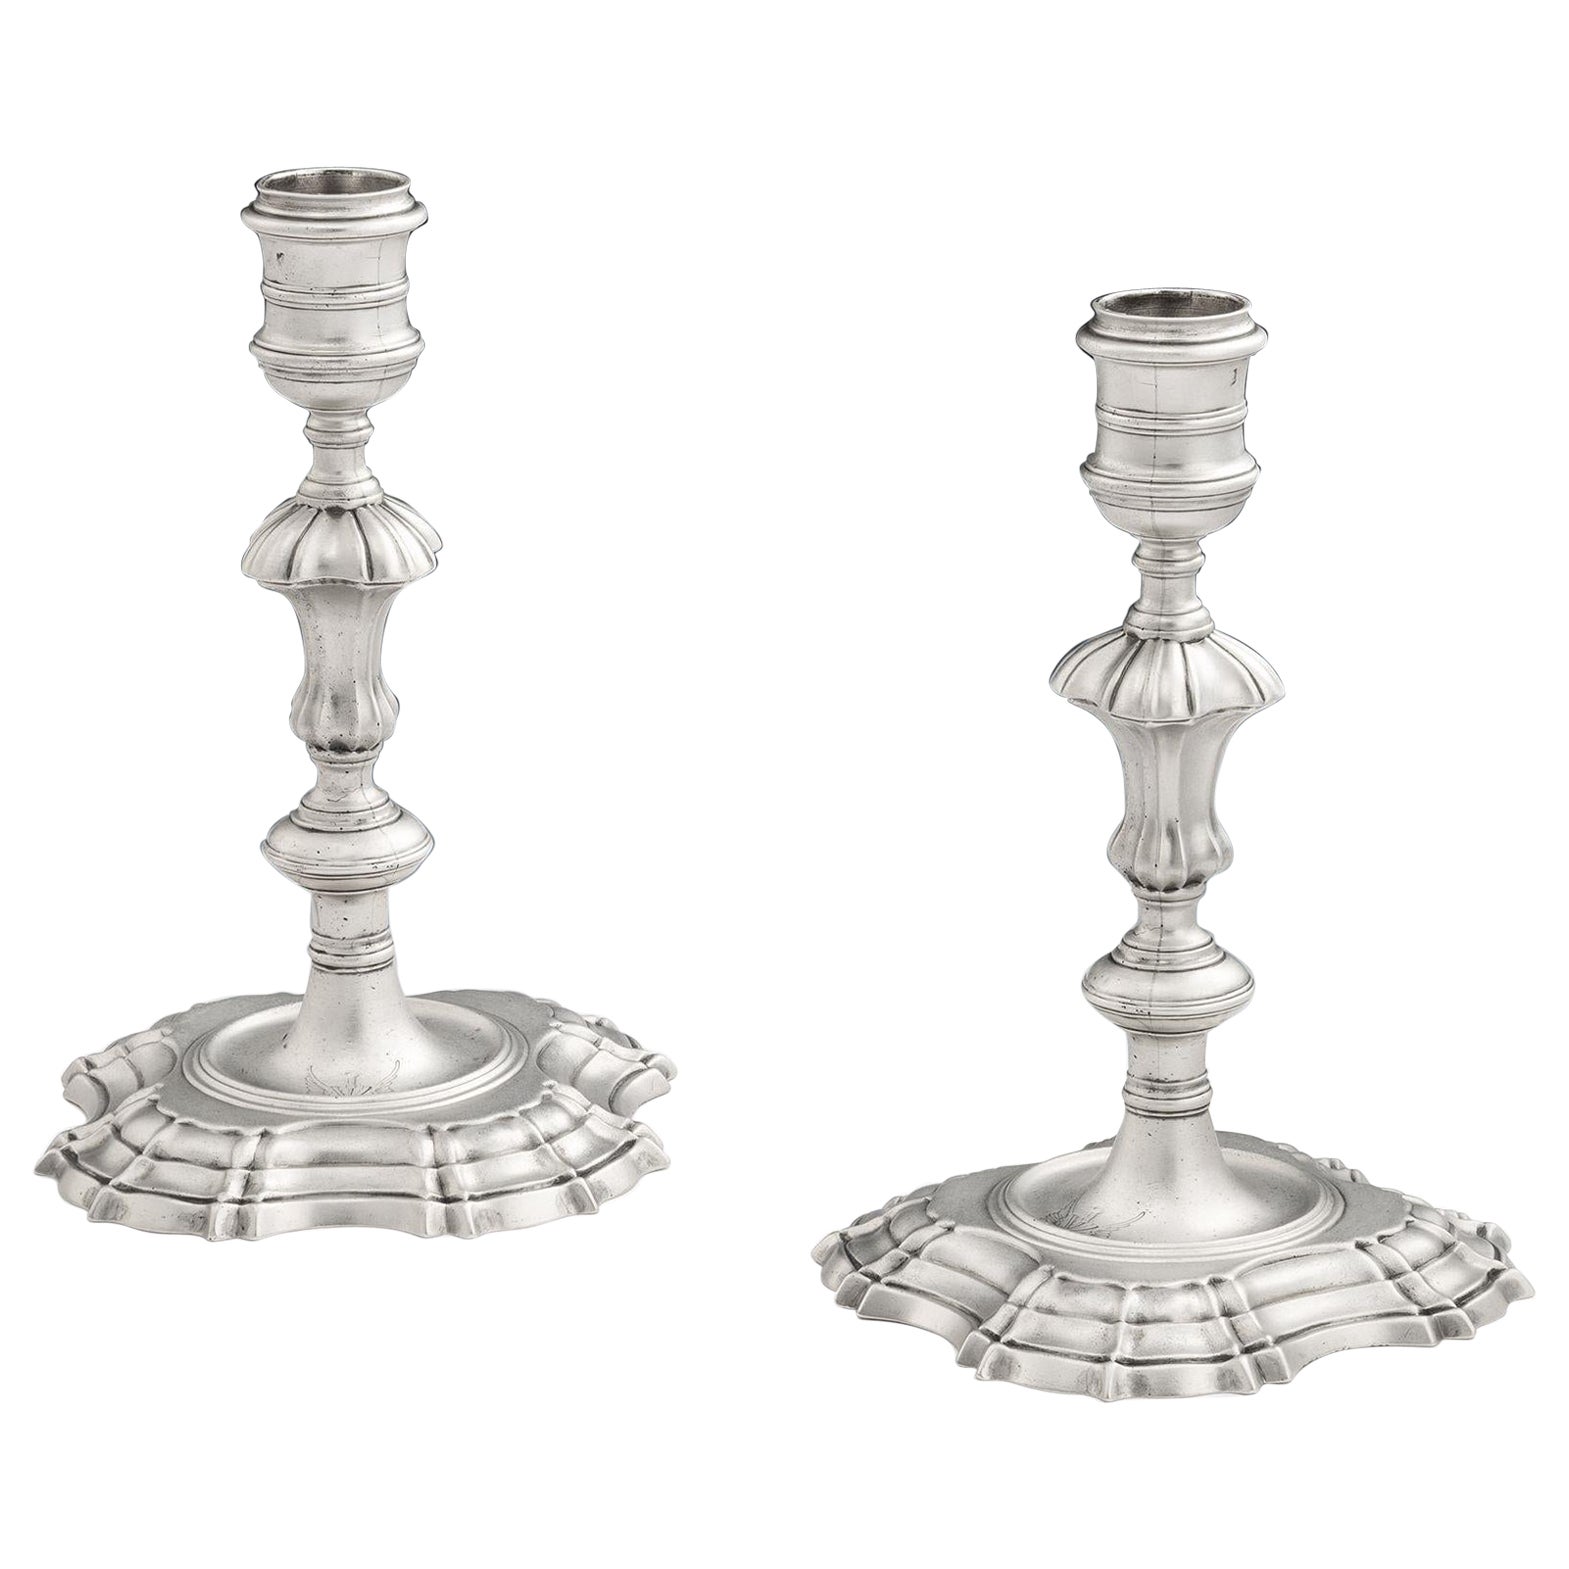 Pair of George II Cast Candlesticks Made in London by William Gould in 1743